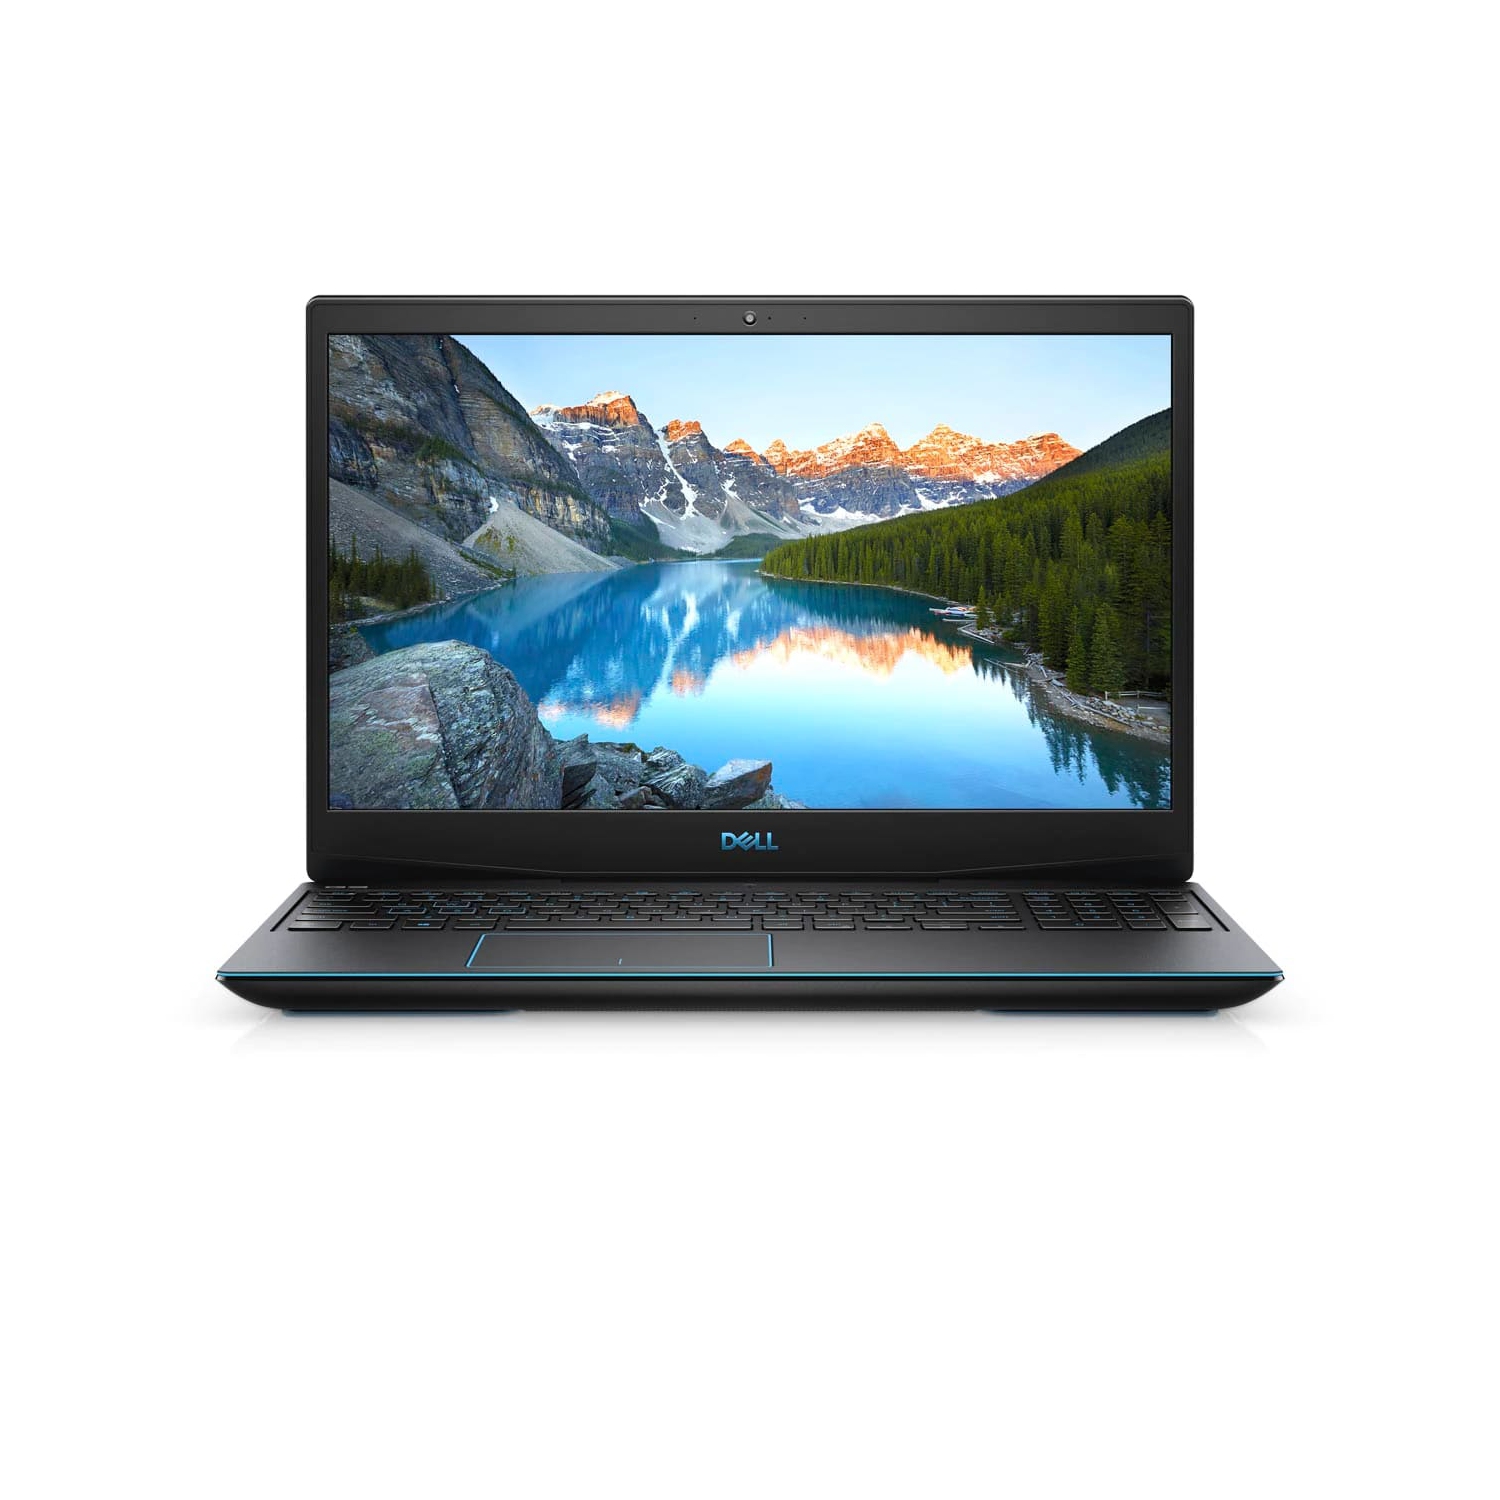 Refurbished (Excellent) - Dell G3 15 3590 Gaming Laptop (2019) | 15.6" FHD | Core i7 - 512GB SSD - 16GB RAM - 1660 Ti | 6 Cores @ 4.5 GHz Certified Refurbished